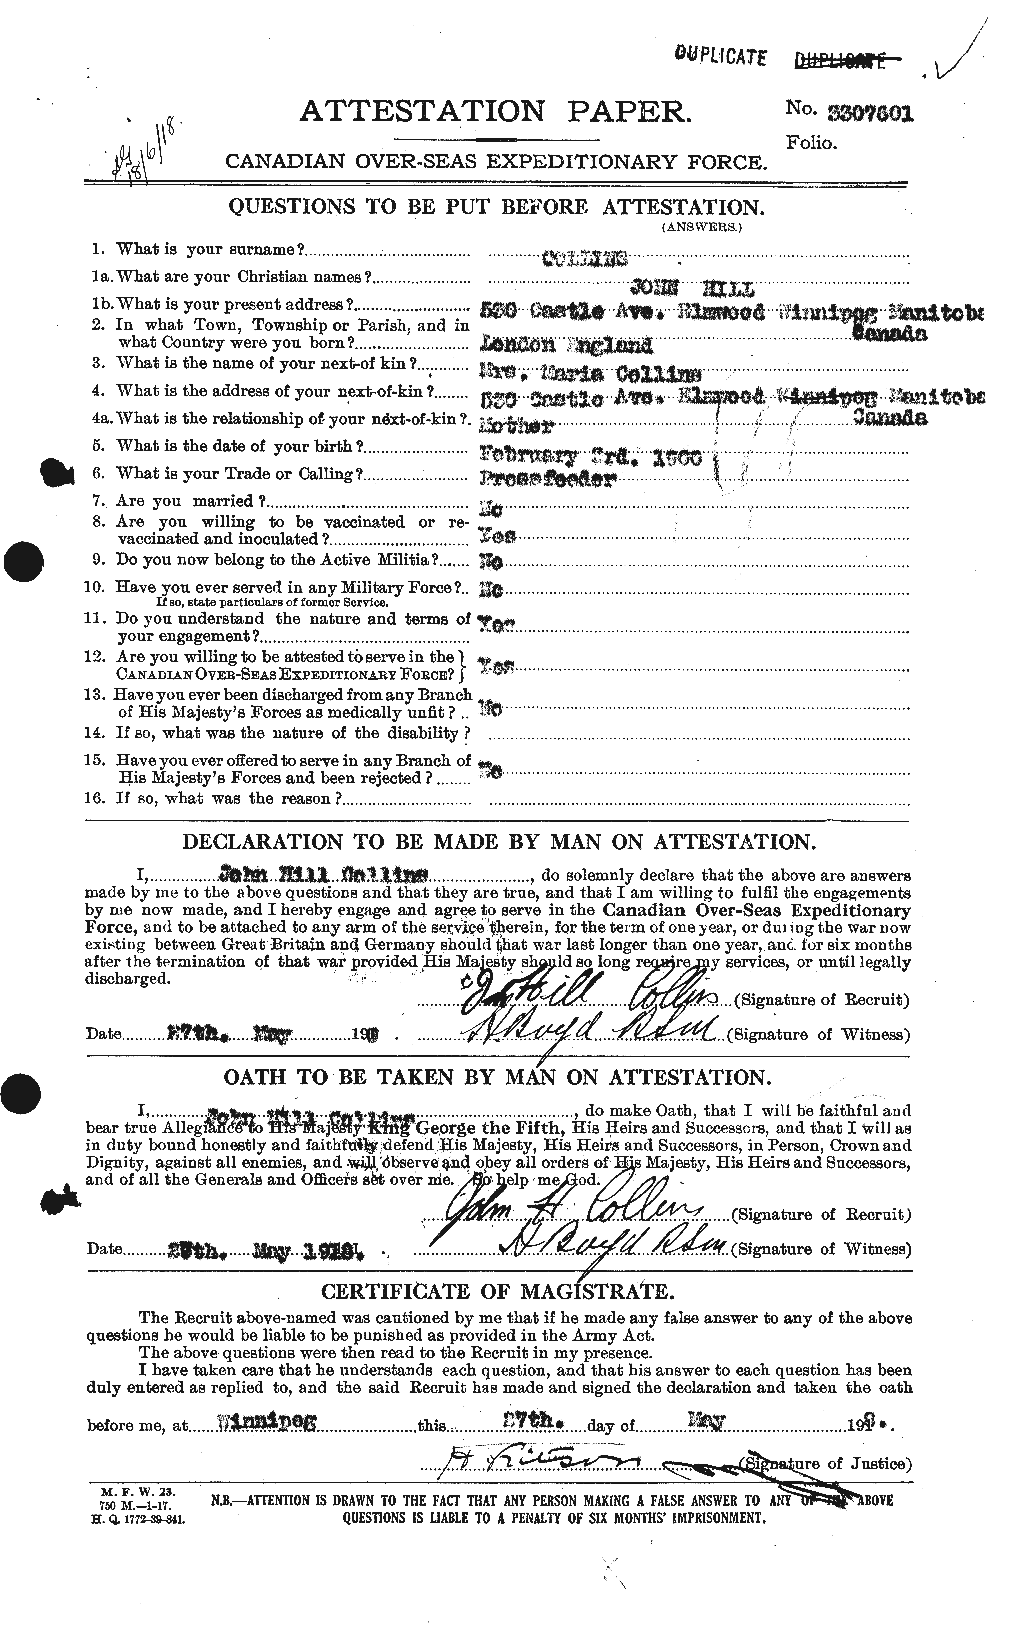 Personnel Records of the First World War - CEF 069772a